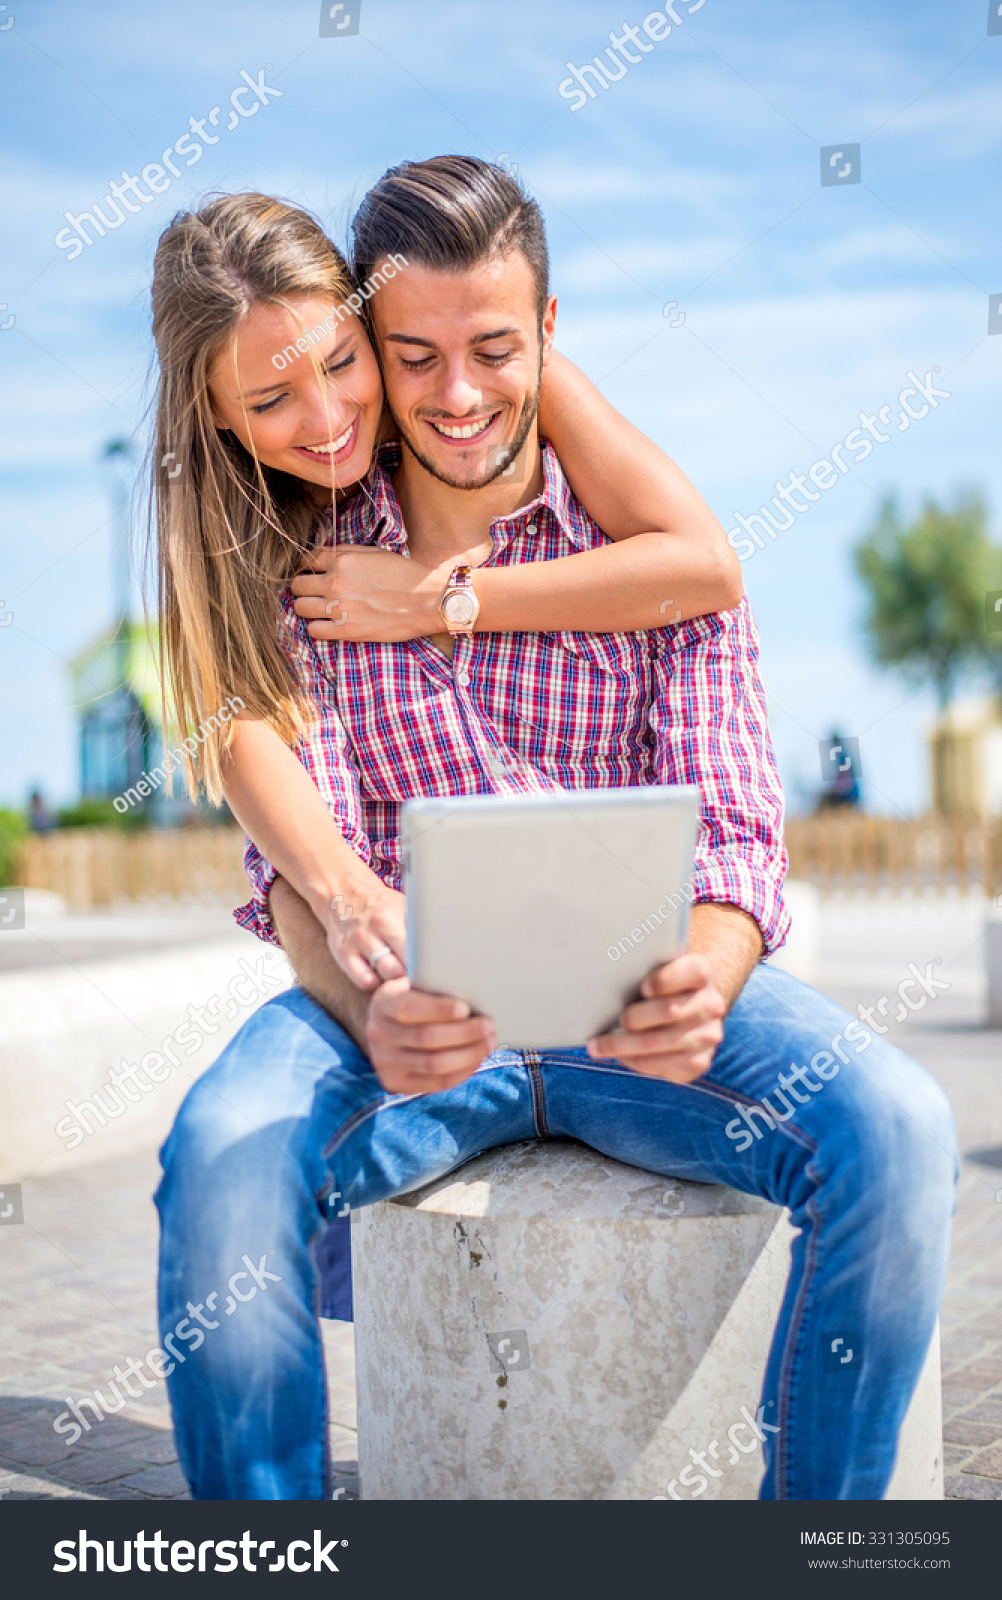 Beautiful couple sitting on a bench outdoors and looking at tablet - Lovers having fun with new technology and shopping online #331305095